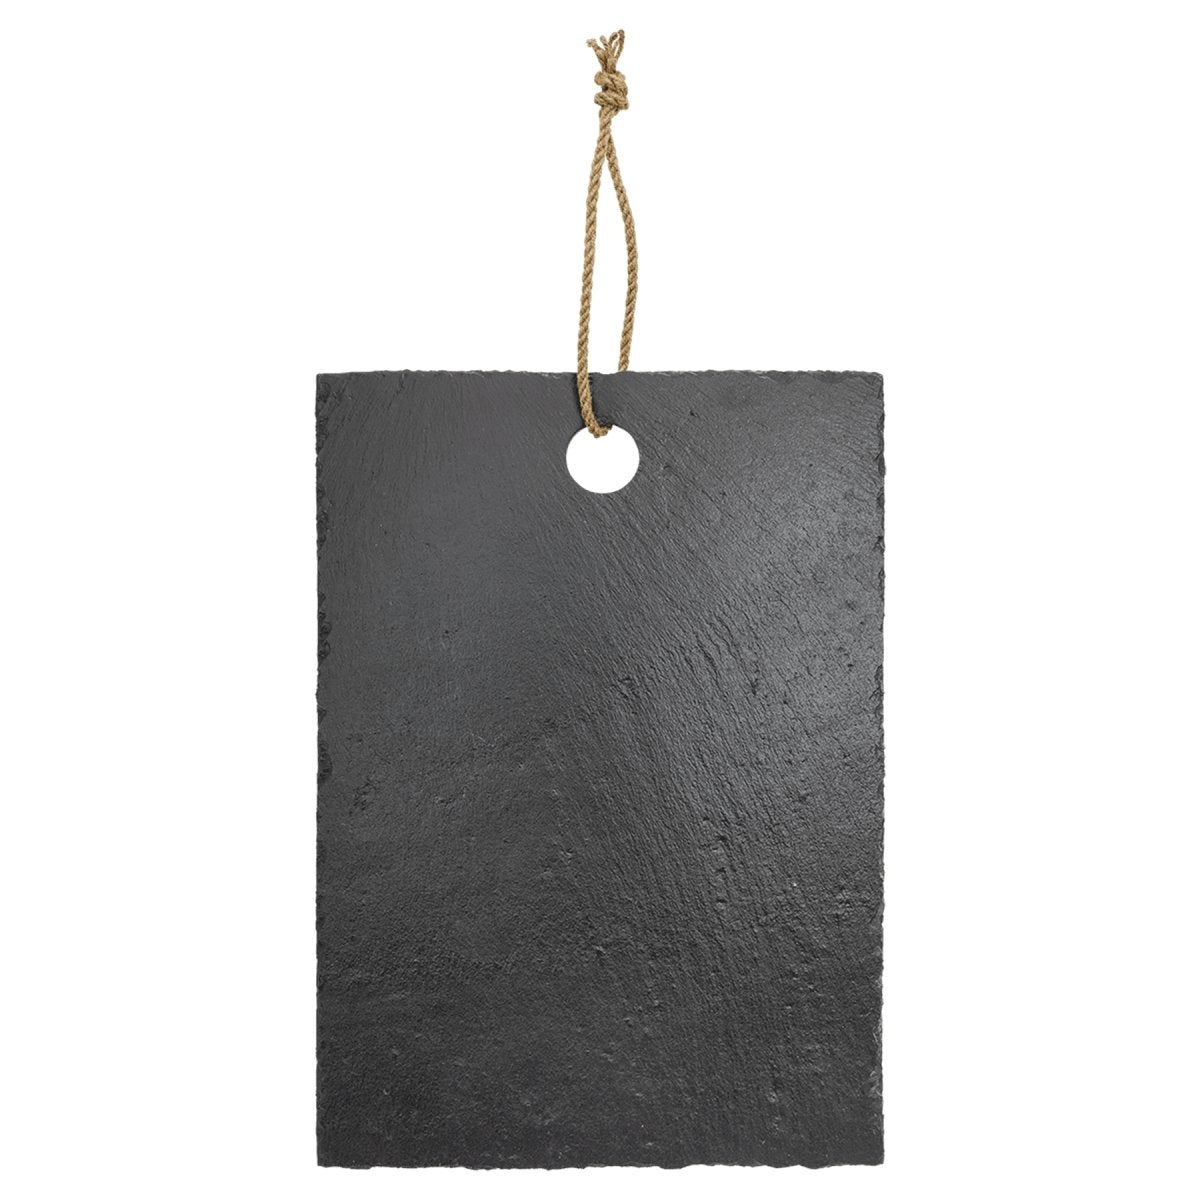 Laserable Slate Cutting Board with Hanger String Rectangle, 13.75" x 9.75" - Inkfinitee Sublimation